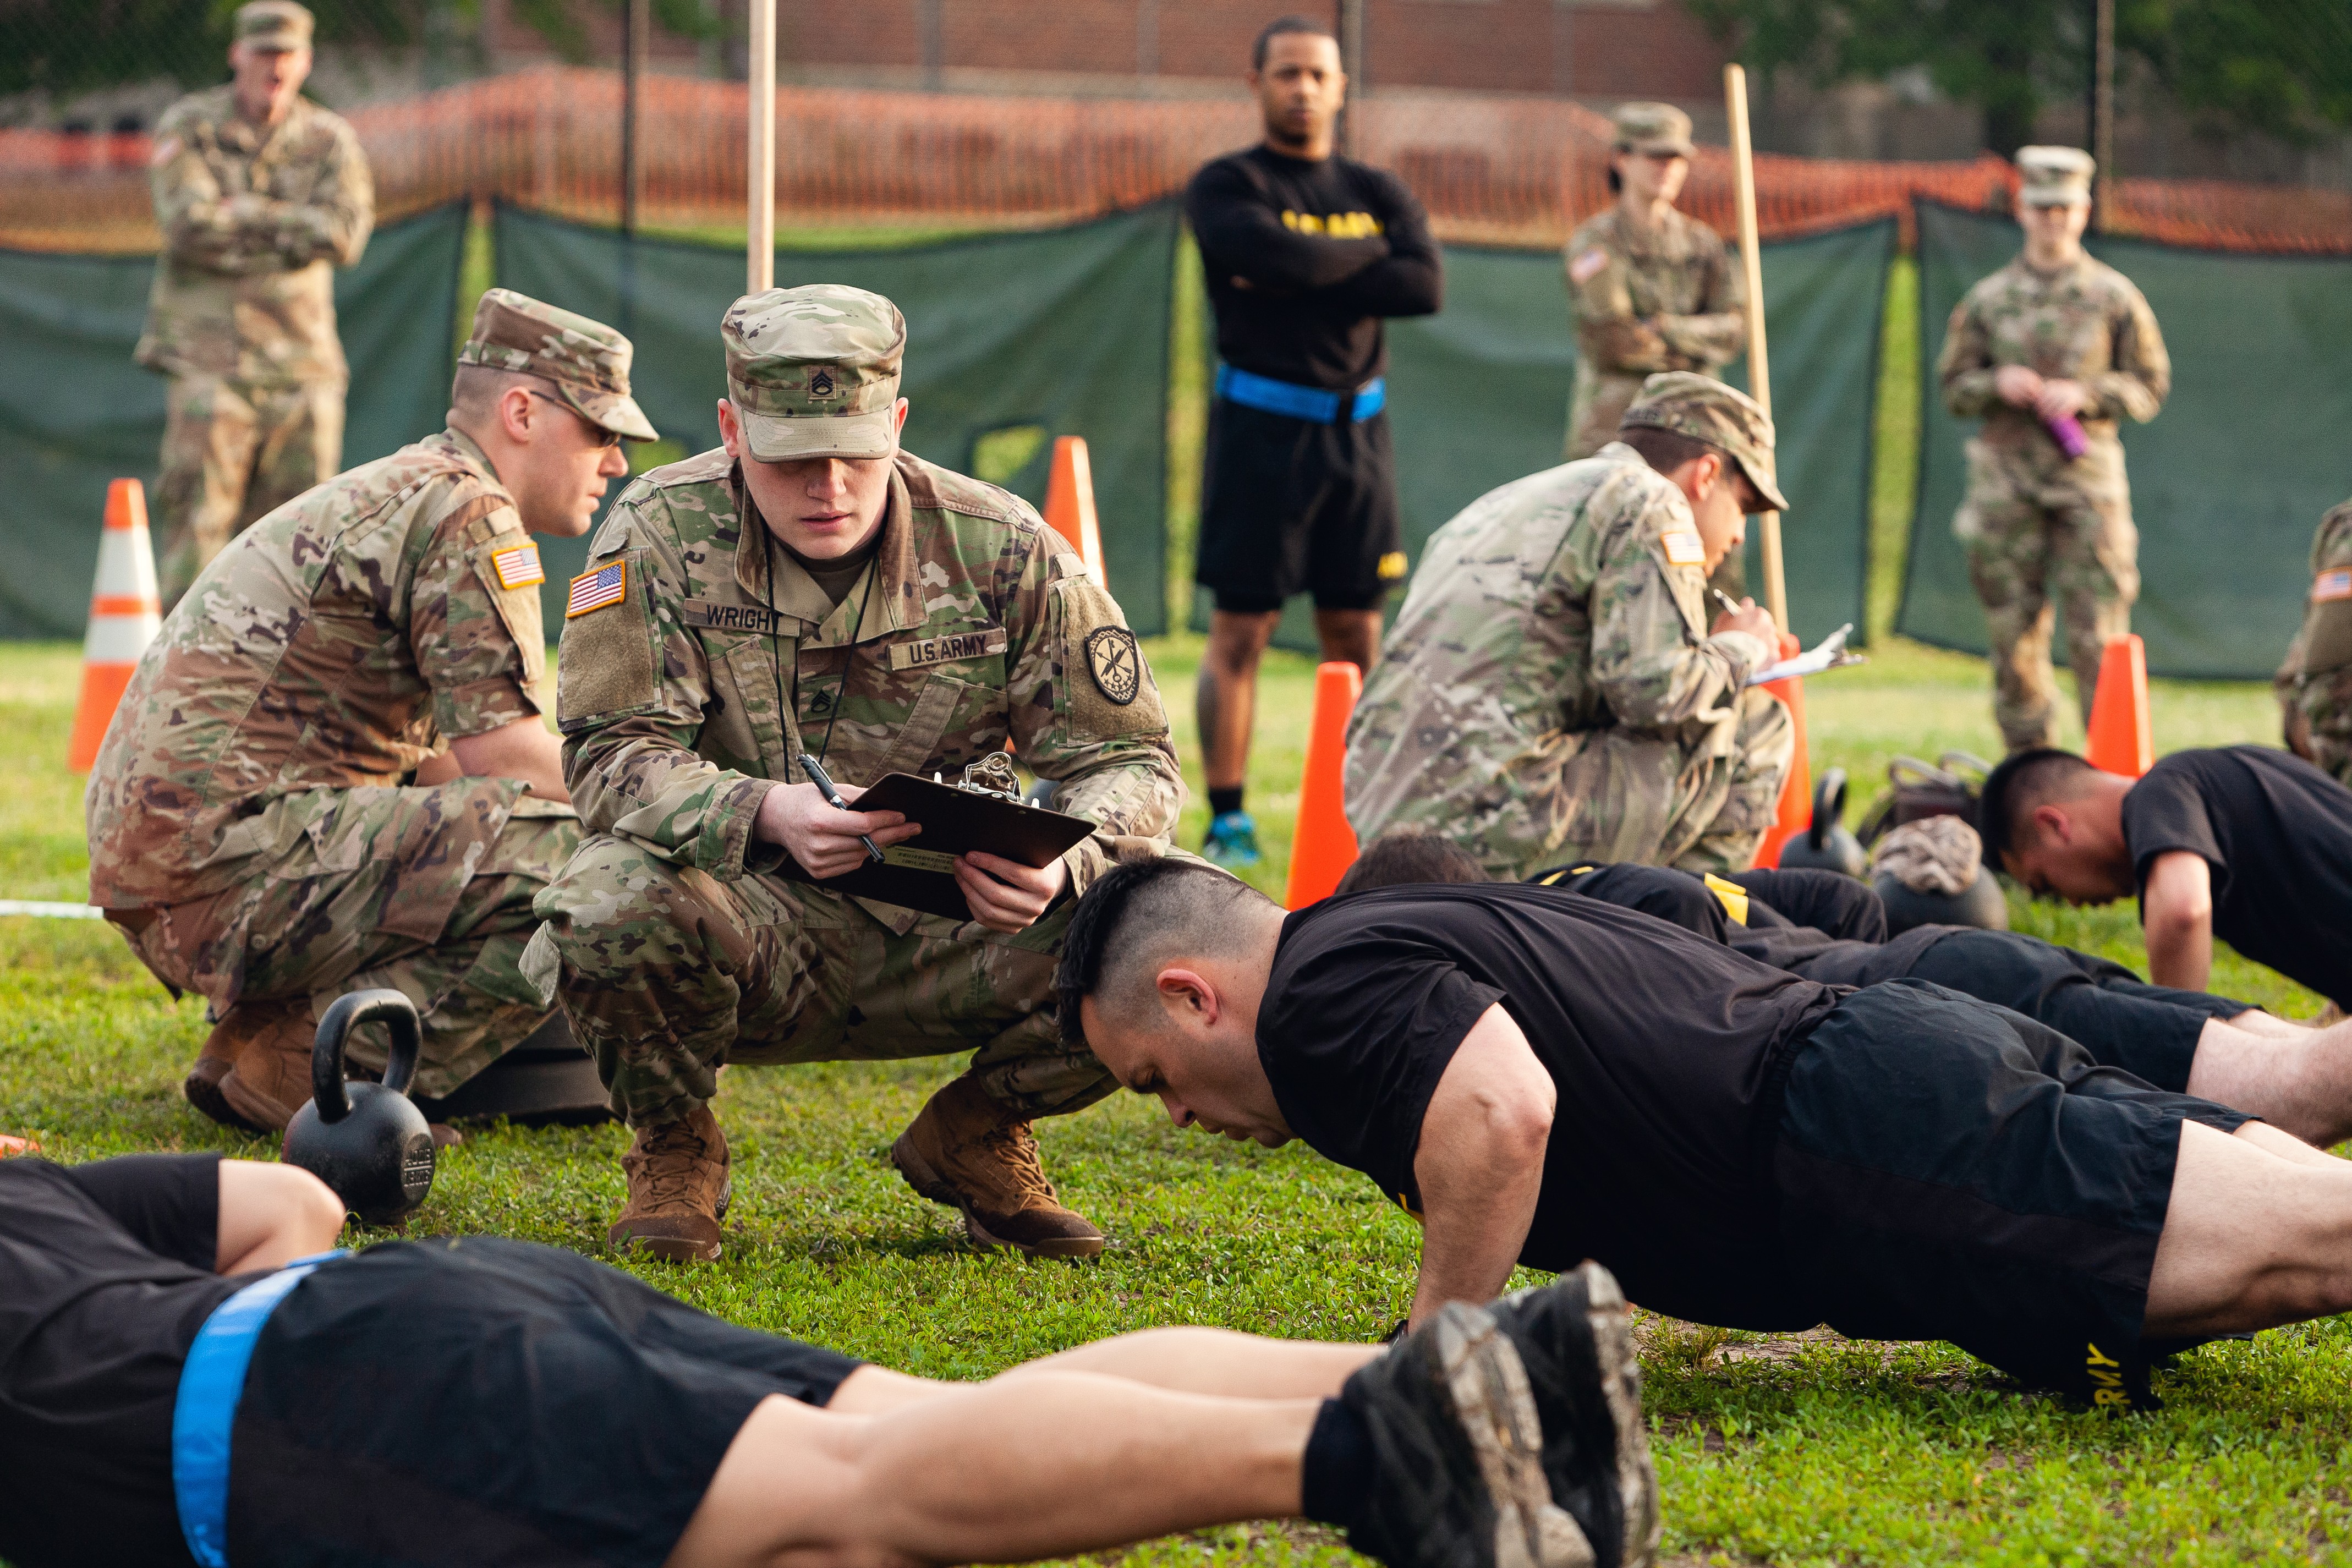 New changes to ACFT being rolled out to impact all Soldiers Article